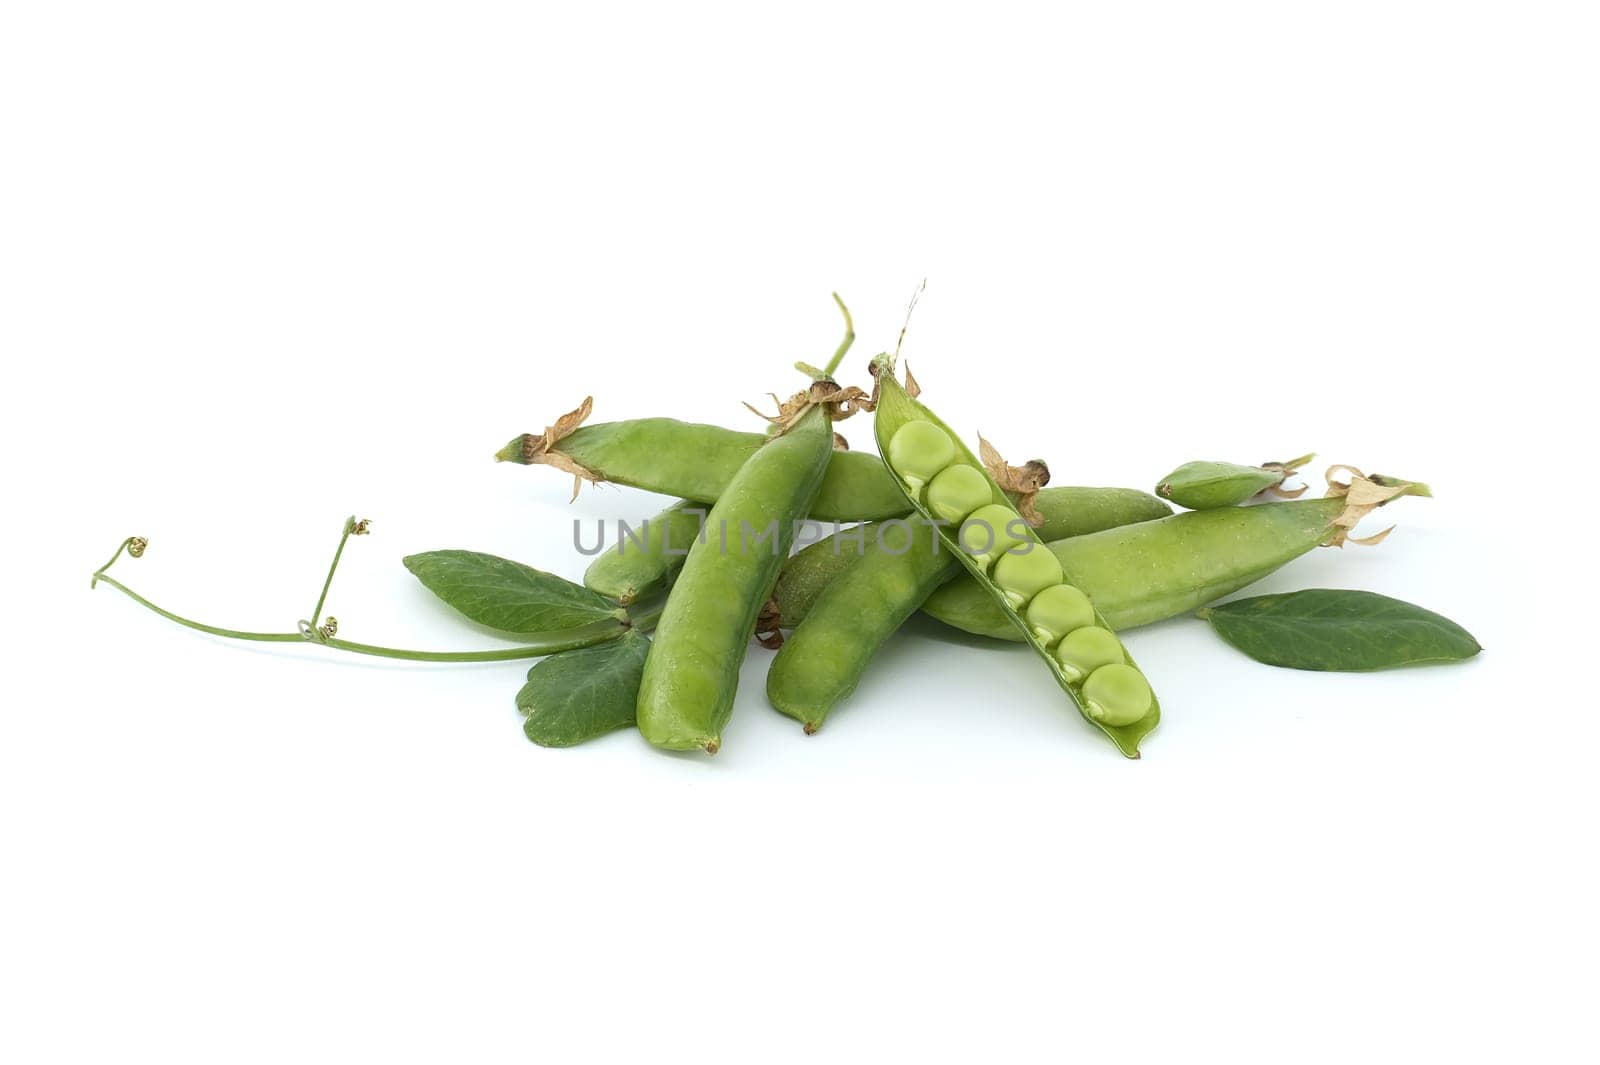 Pea pod is open and green peas inside over white background by NetPix